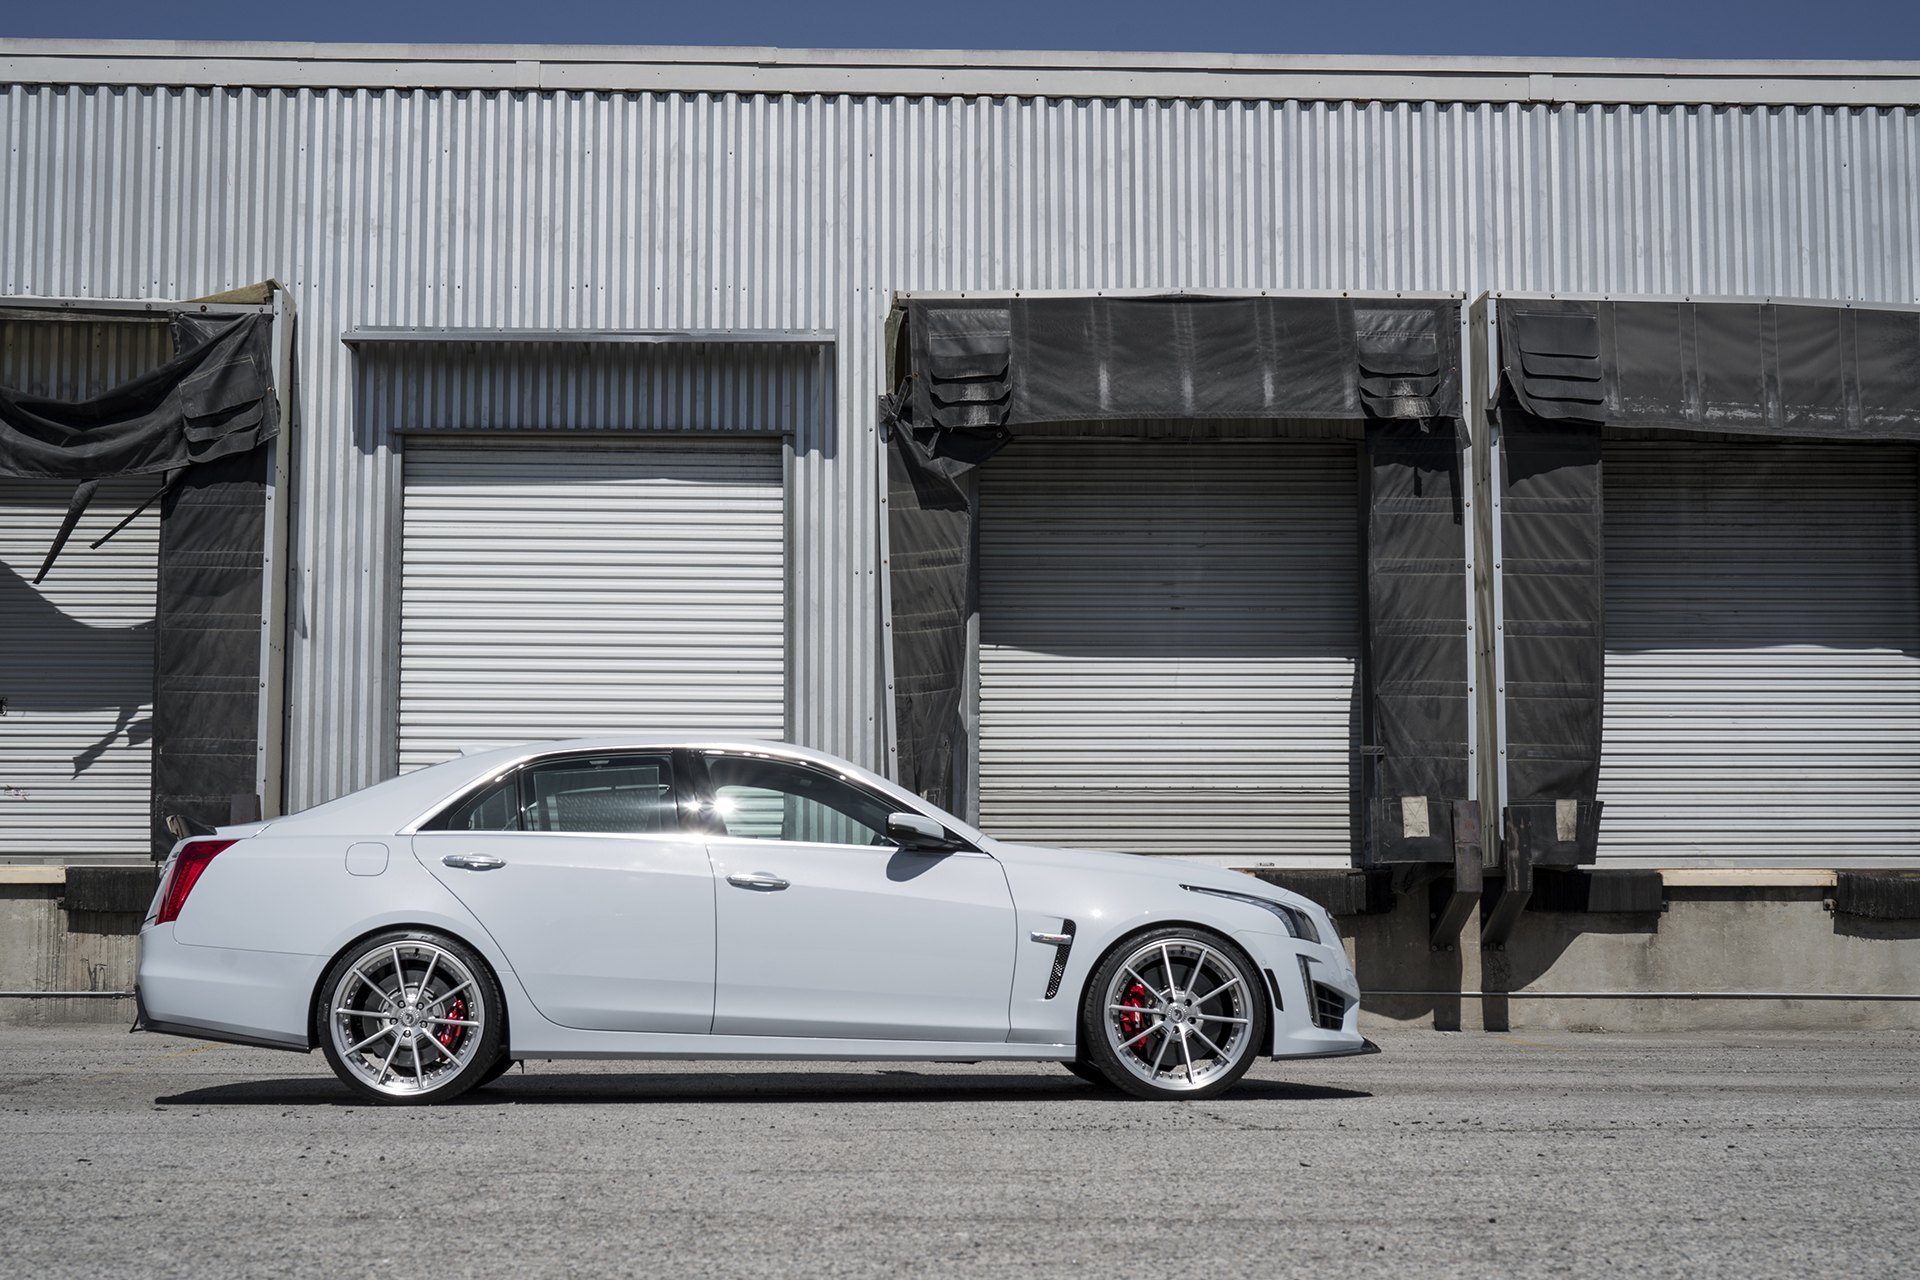 Aftermarket Side Skirts on Gray Cadillac CTS - Photo by Forgiato